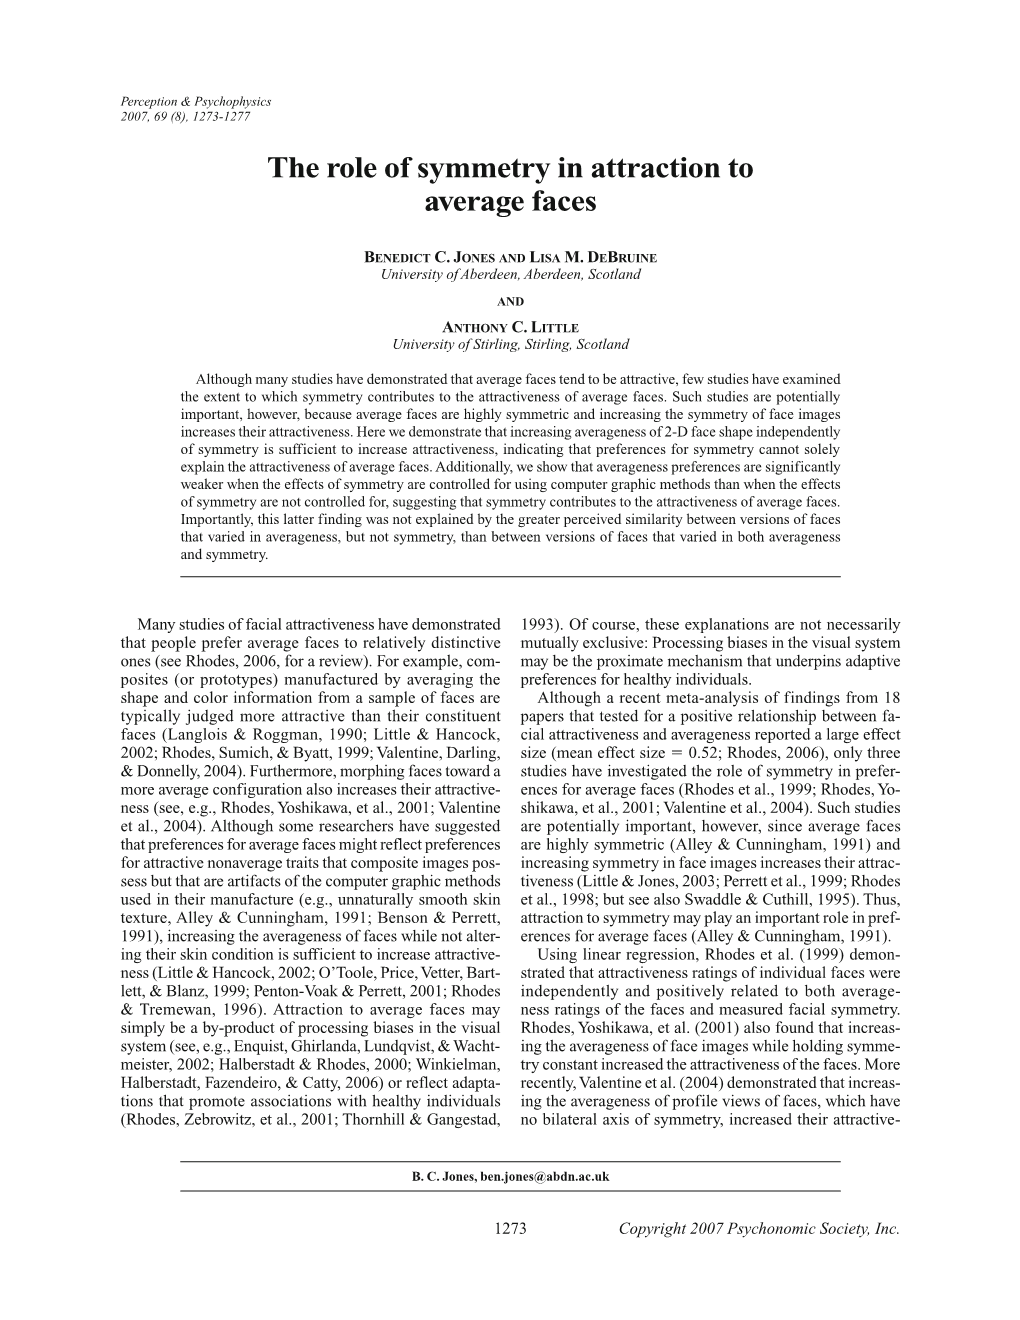 The Role of Symmetry in Attraction to Average Faces